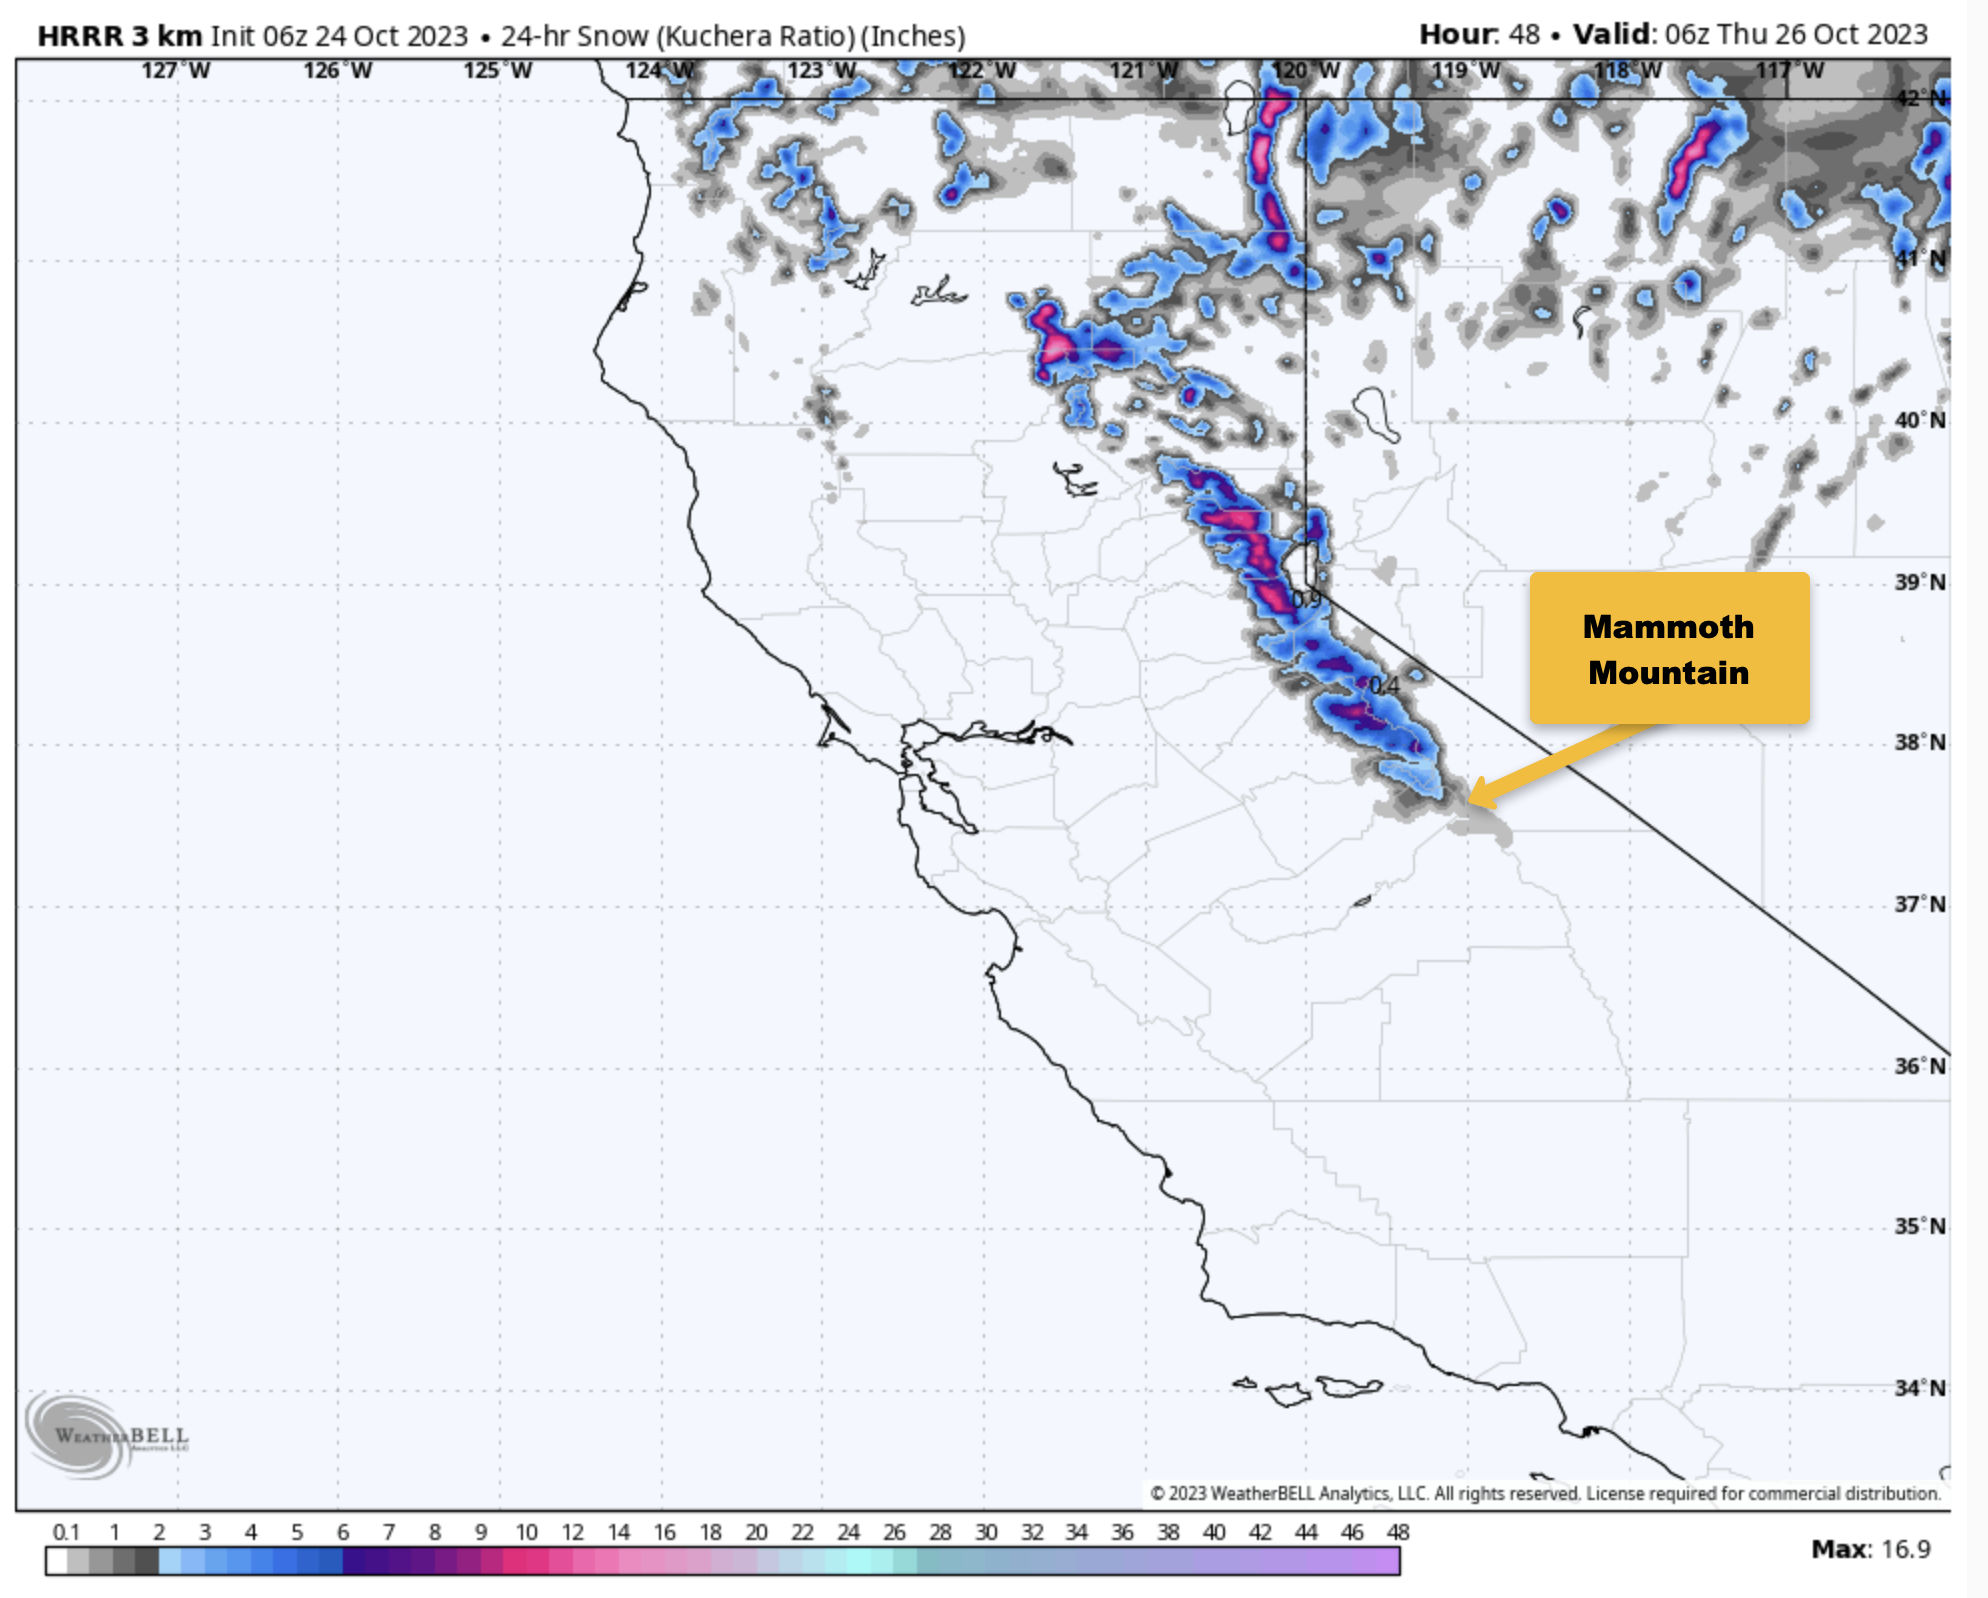 The HRRR model has a slight dusting of snow for Mammoth Mountain tonight. - Mammoth Weather Image